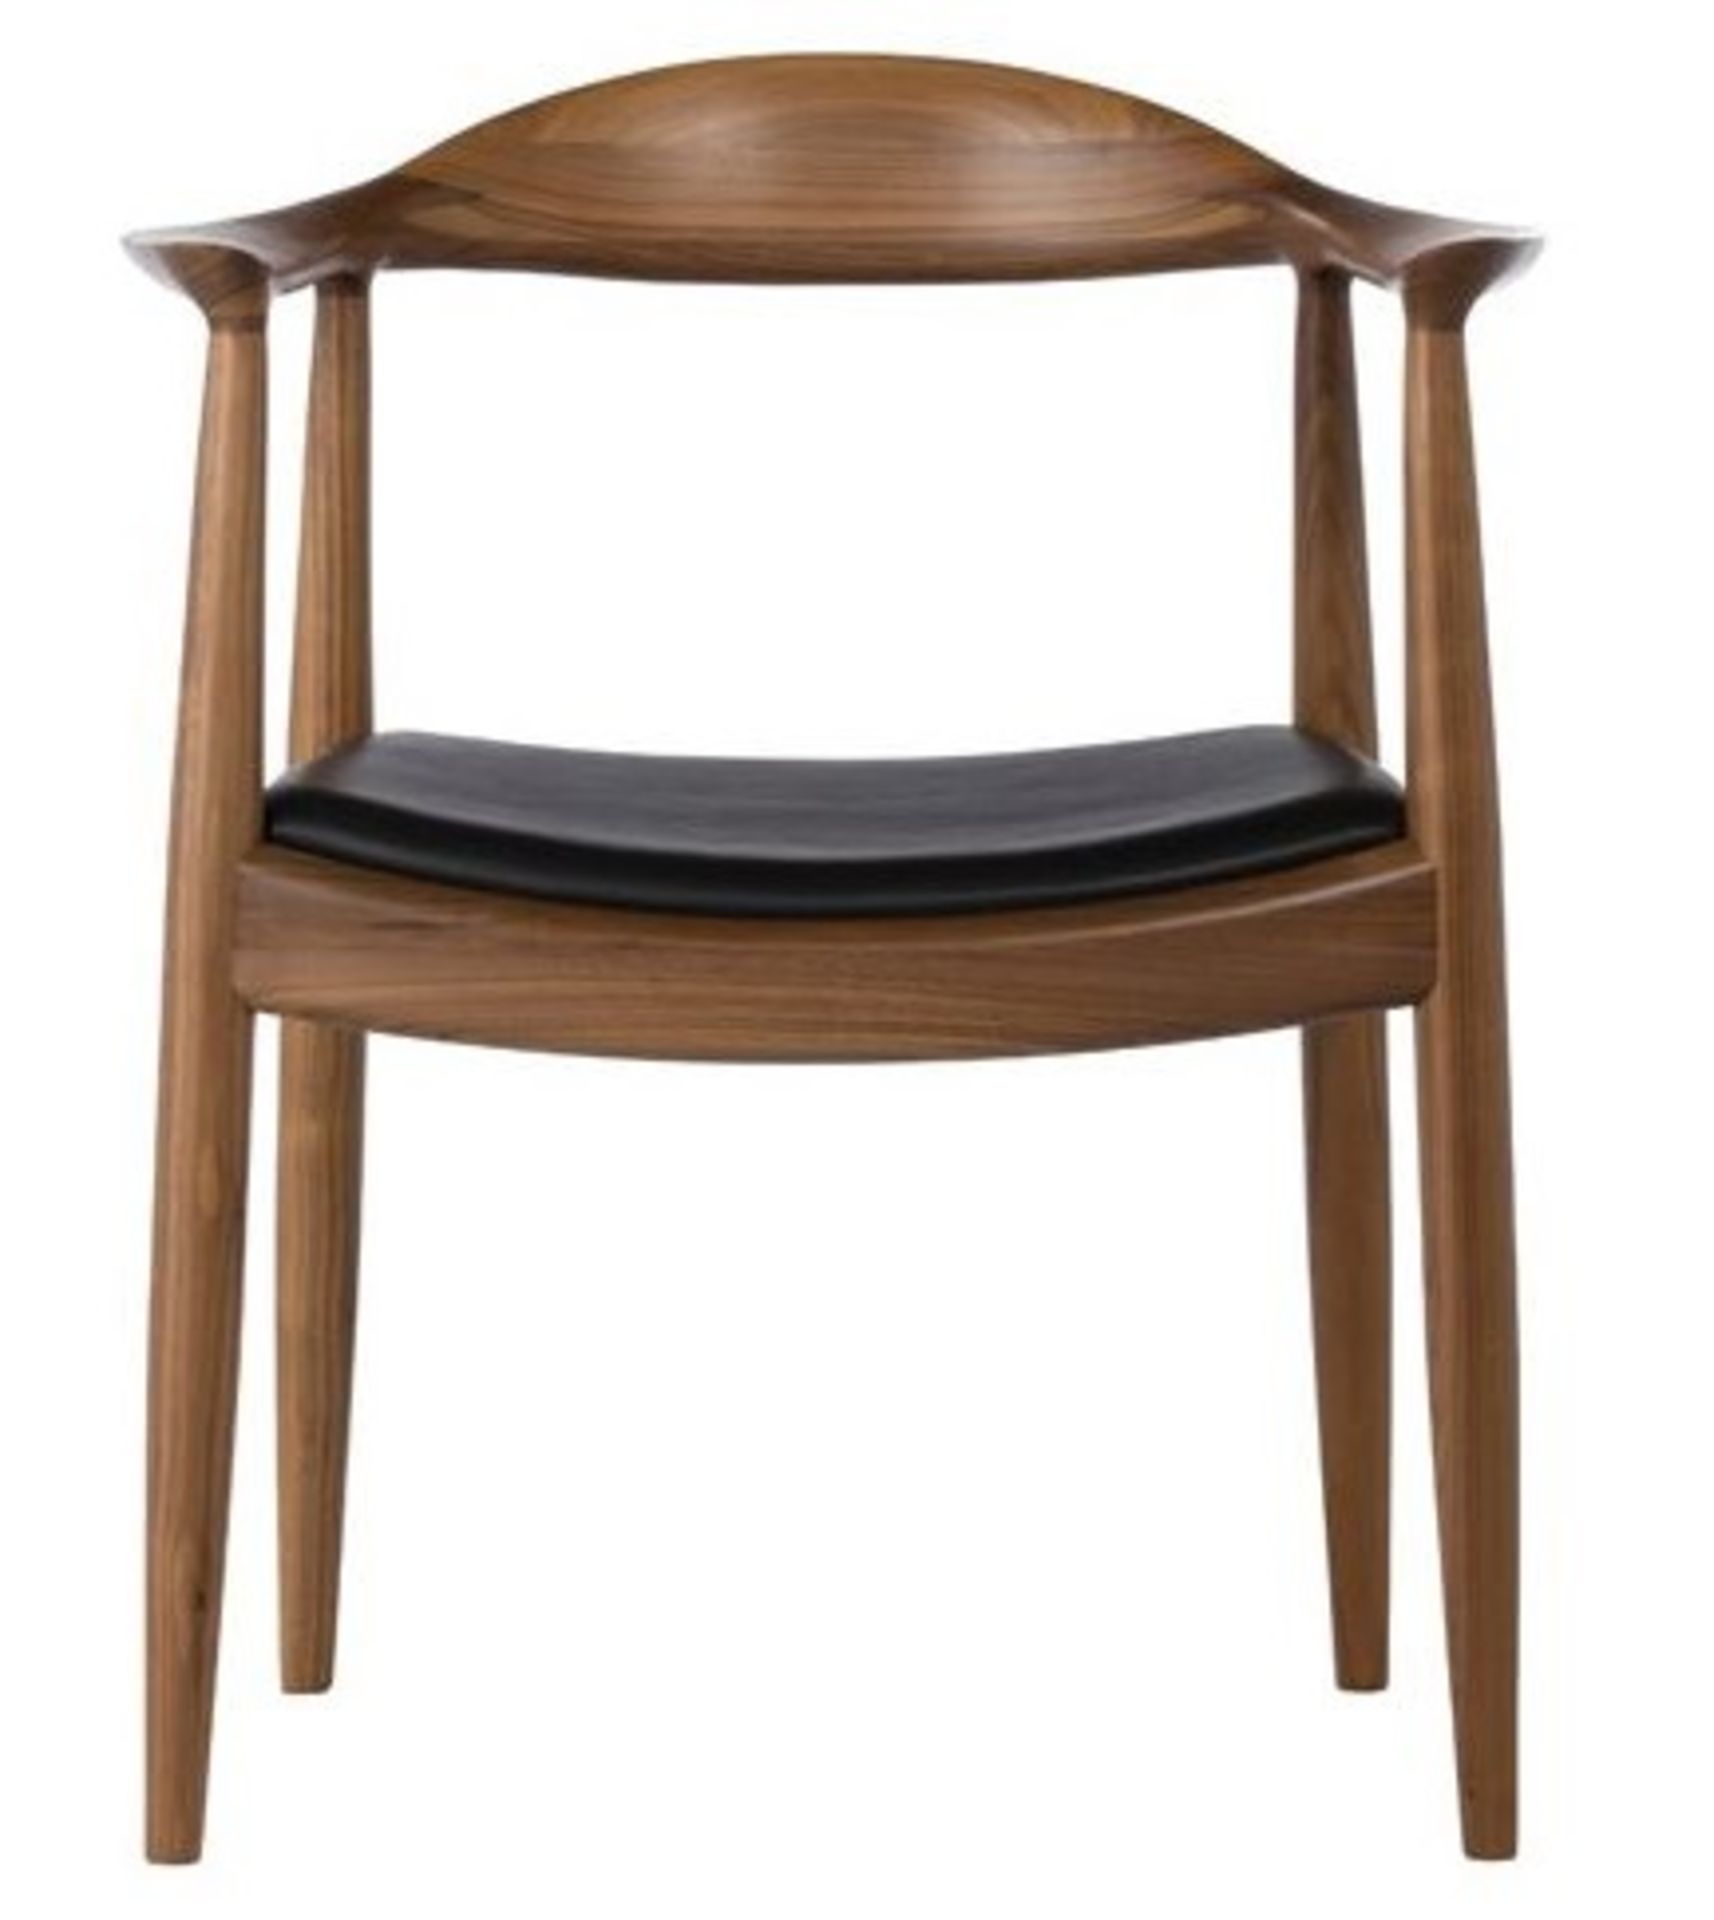 4 x Hans-j Wegner Inspired Dining Chairs In Walnut - New & Boxed- CL508 - Location: Altrincham WA14 - Image 3 of 5